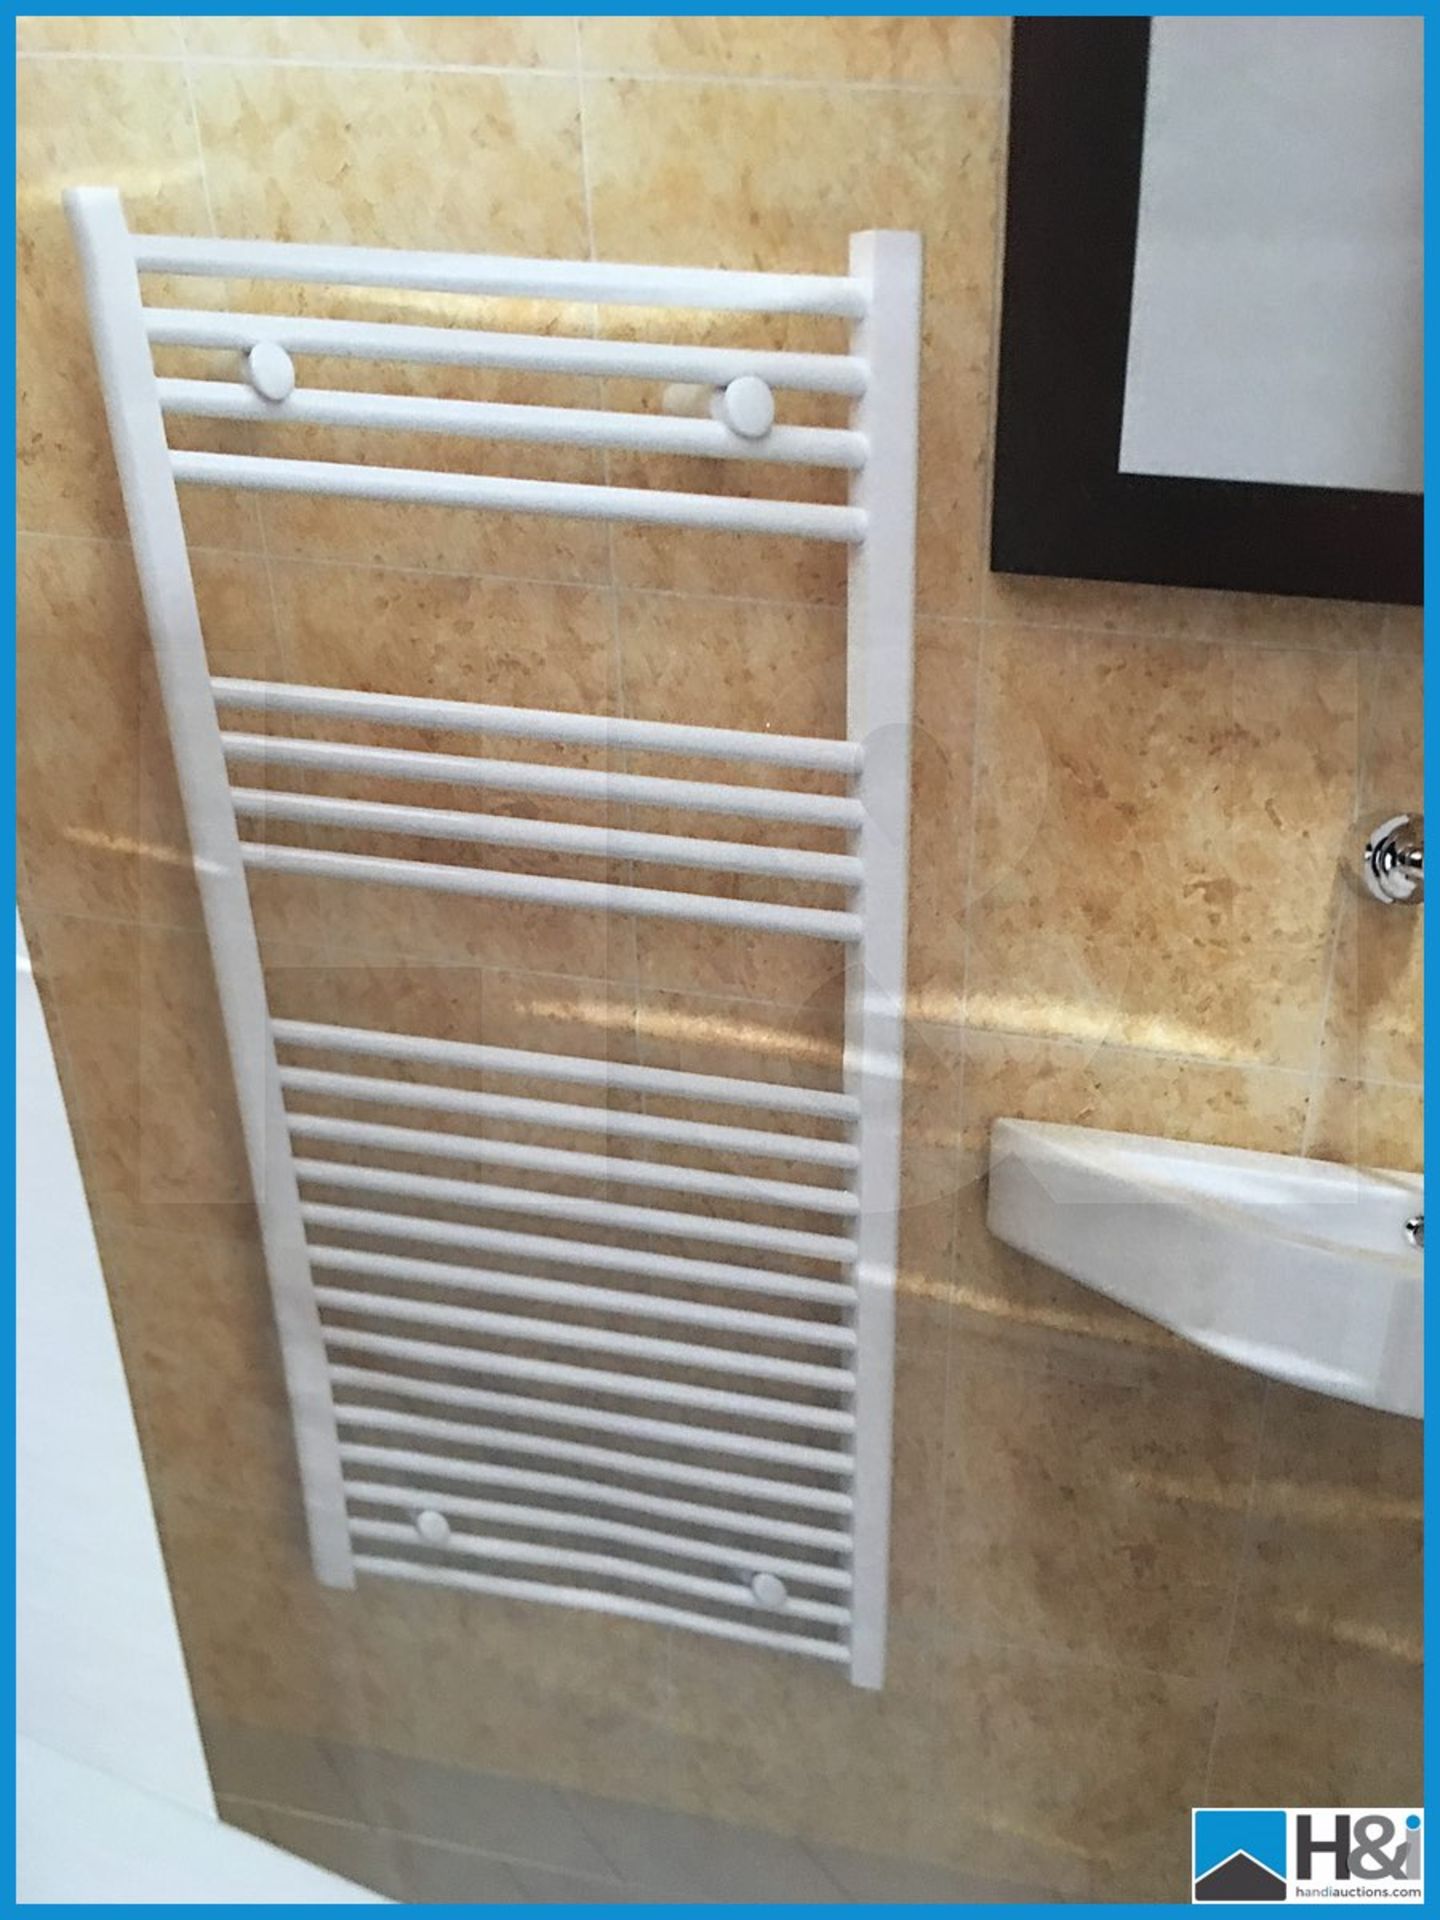 Designer Kudox Premium ladder towel rail 600x110 in white finish. New and boxed. Suggested - Image 2 of 4